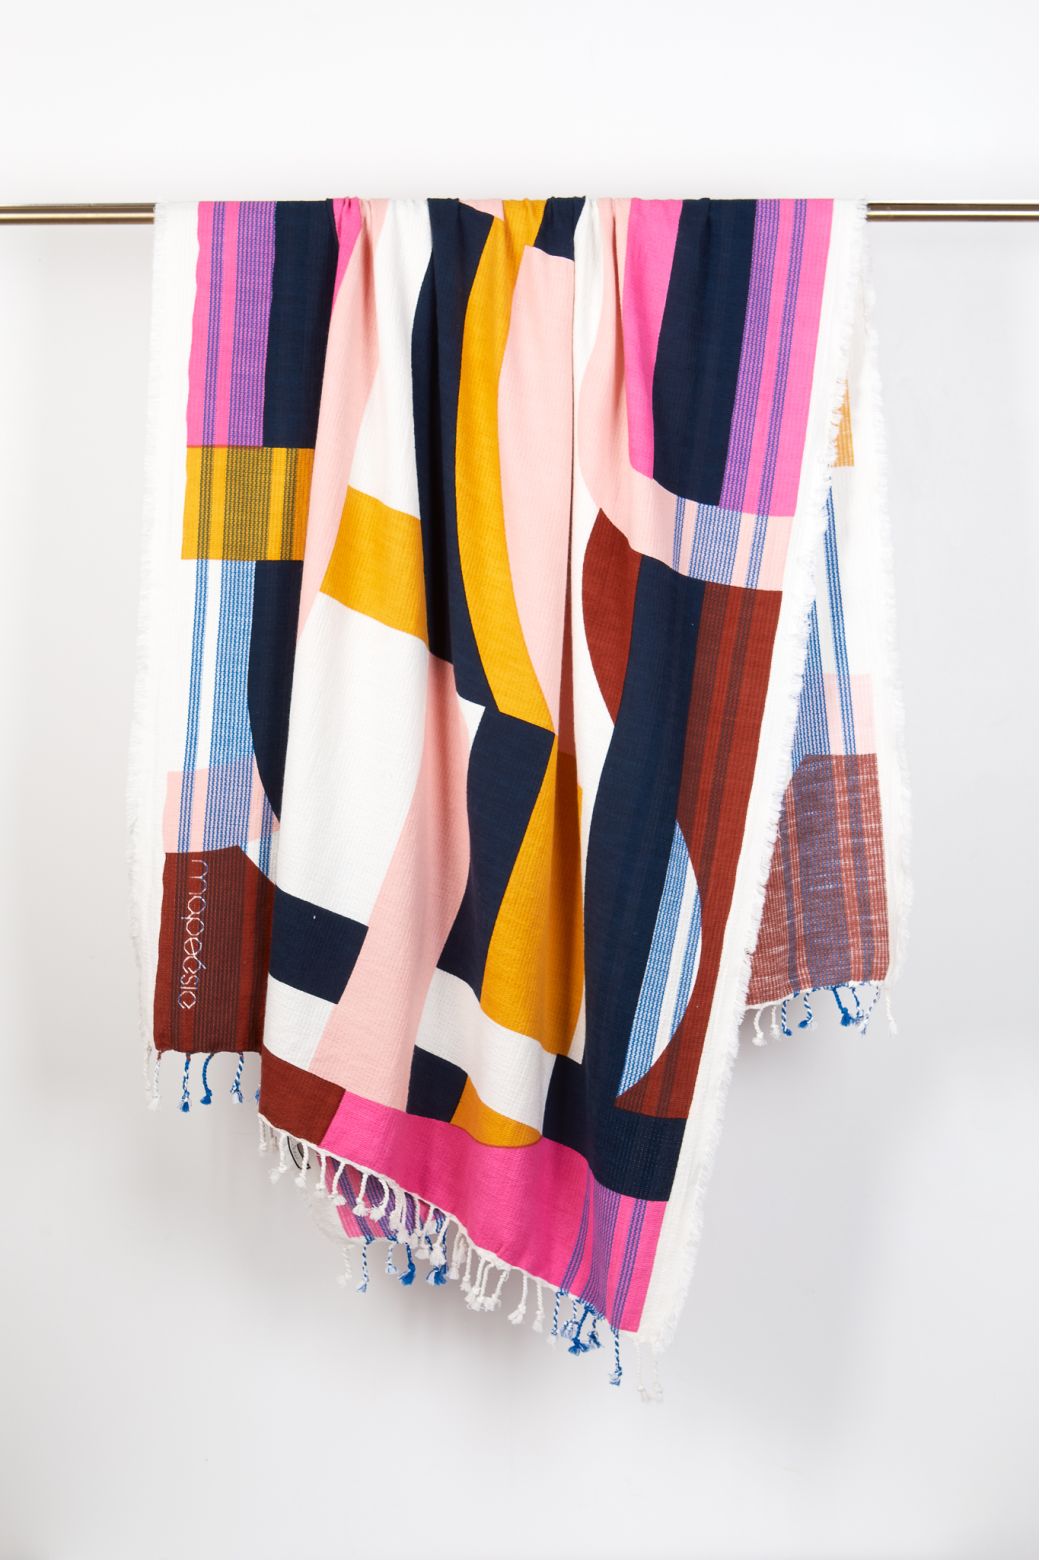 FOUTA SUPERSONIC ROSE